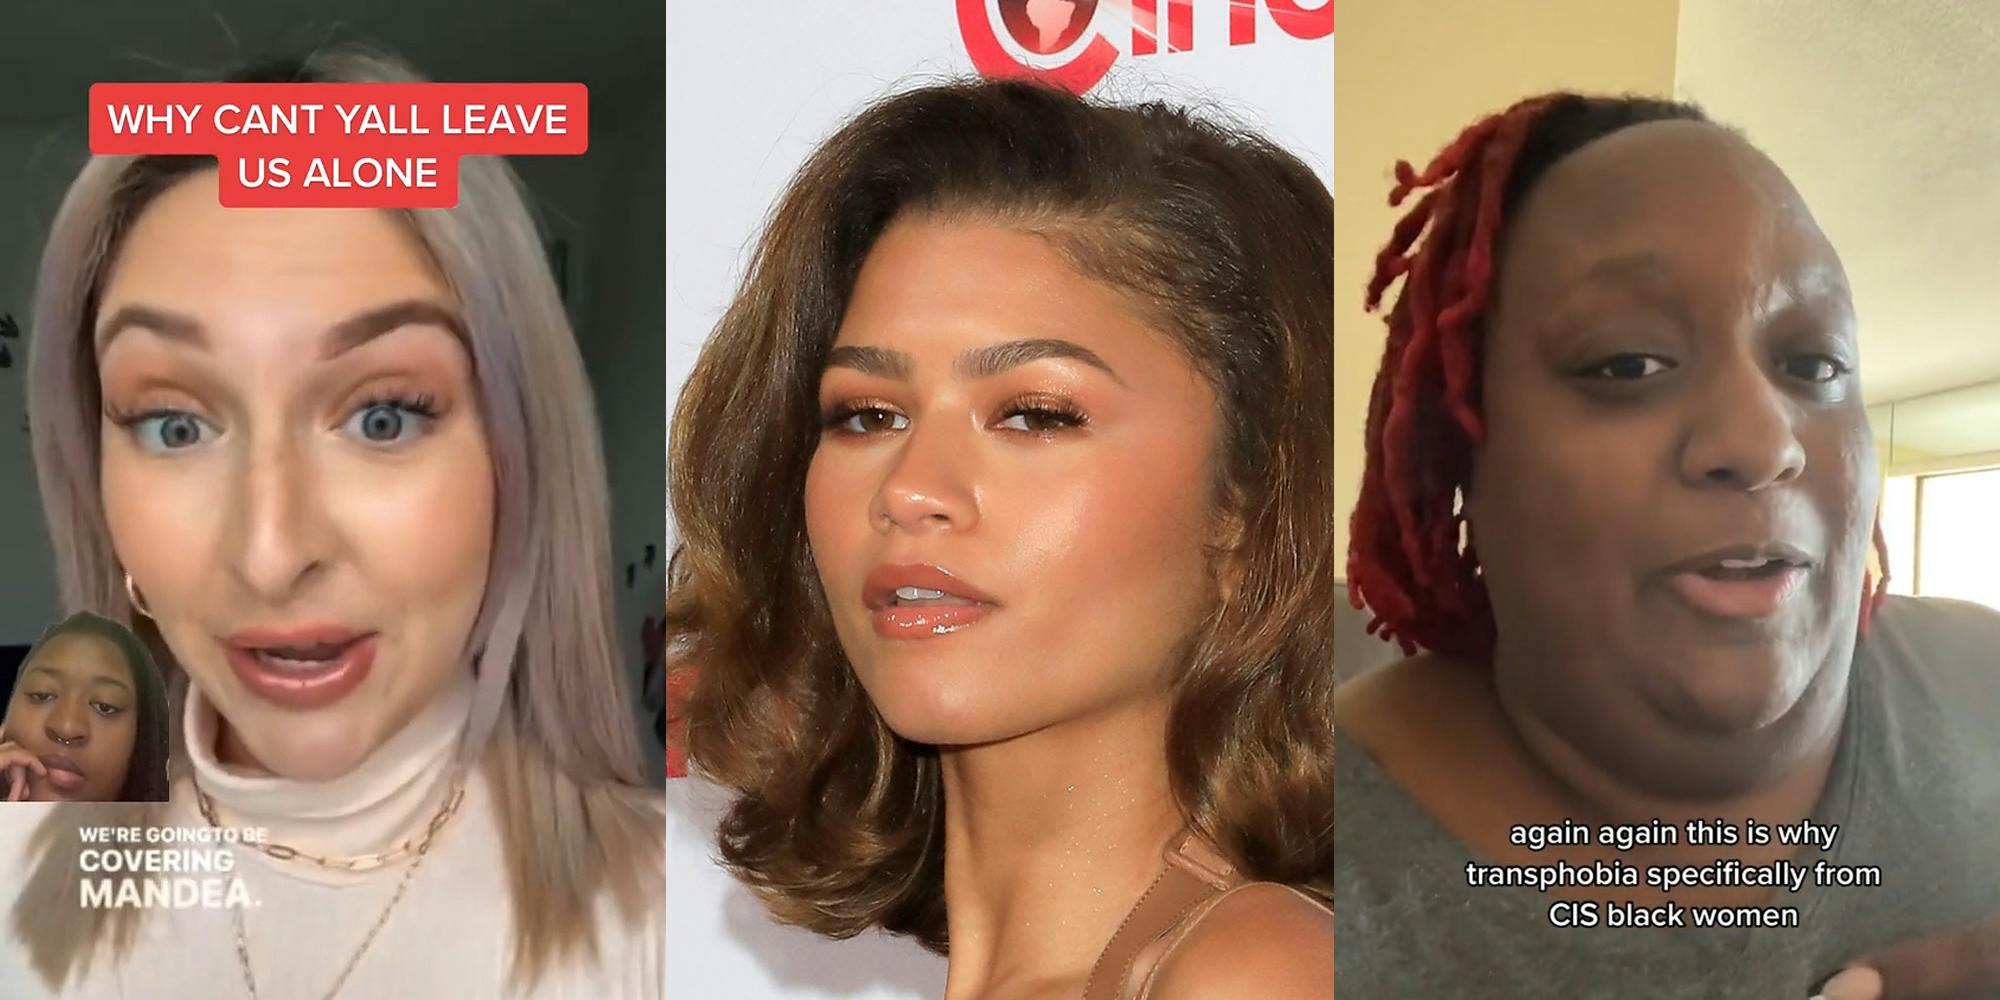 person greenscreen TikTok over tiktok of person speaking with caption "WHY CANT YALL LEAVE US ALONE" "WE'RE GOING TO BE COVERING MANDEA" (l) Zendaya in front of white background (c) person speaking in front of tan walls with caption "again again this is why transphobia specifically from CIS black women" (r)